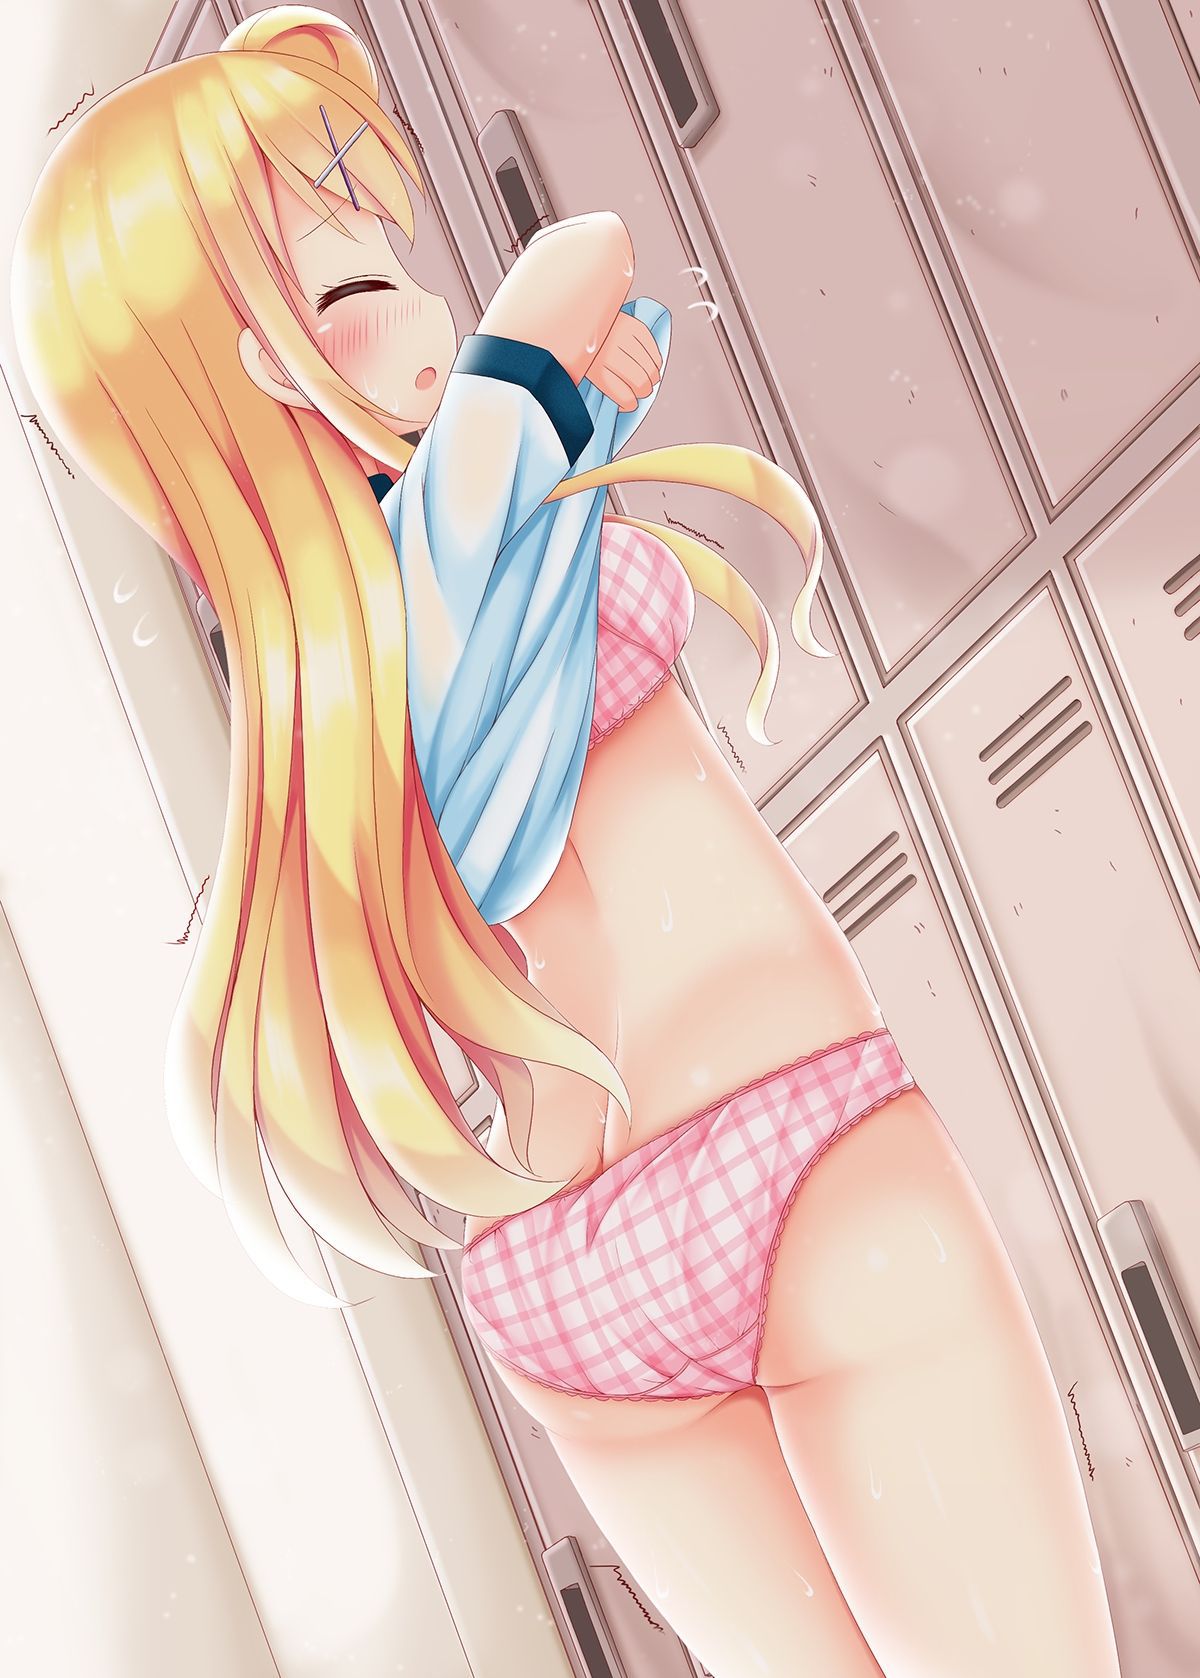 【Secondary erotic】 Here is the erotic image in the changing room of paradise where girls in the middle of changing clothes can be seen 26